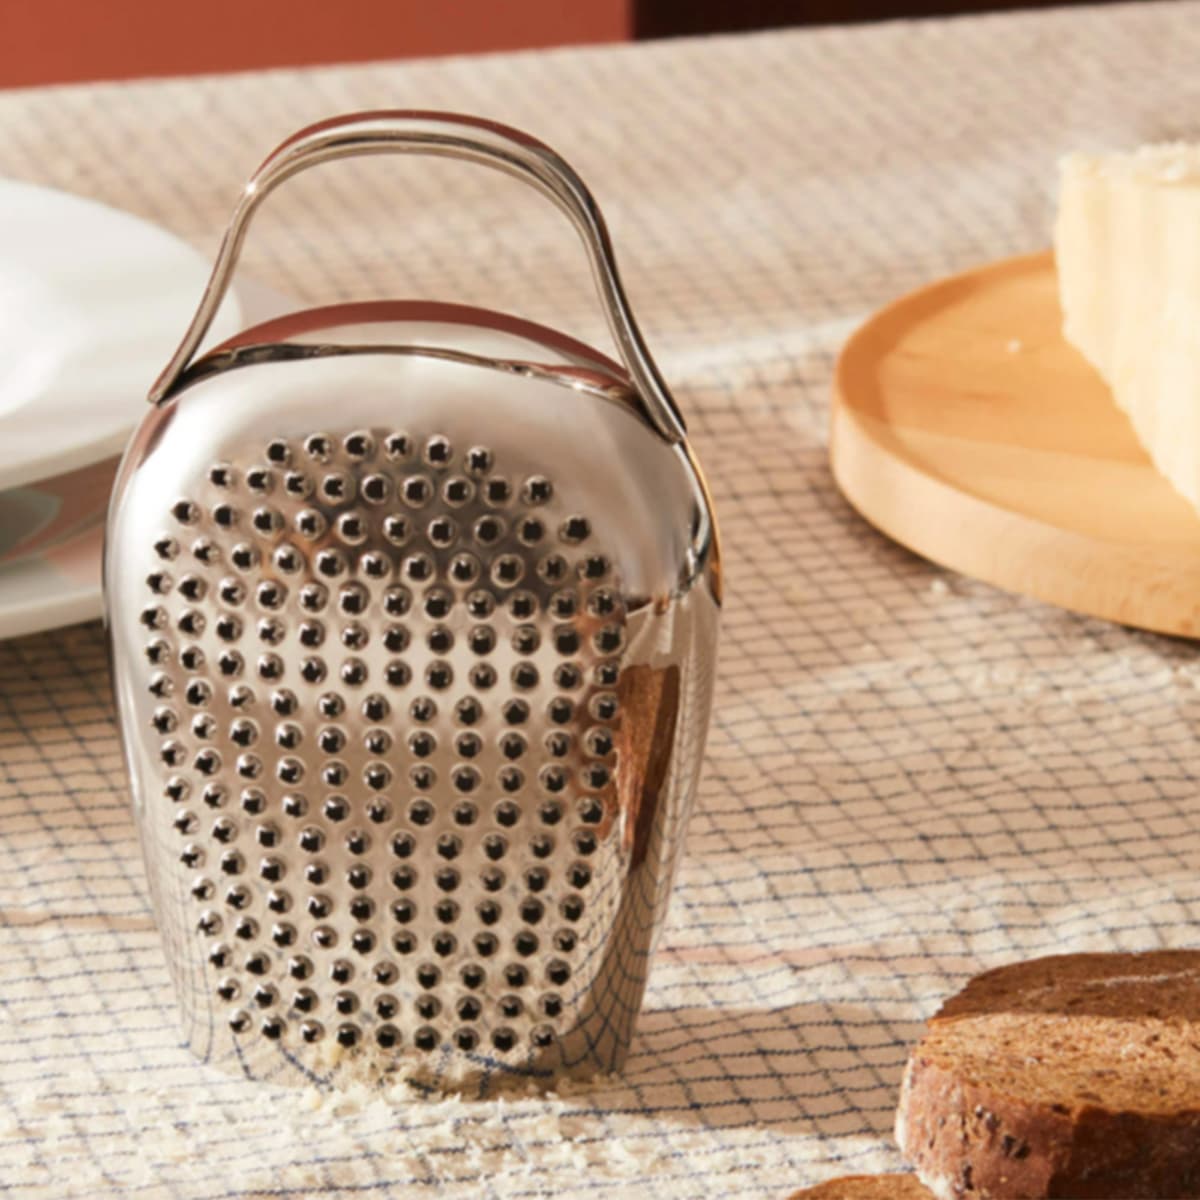 Alessi Parmenide Cheese Grater - Ice